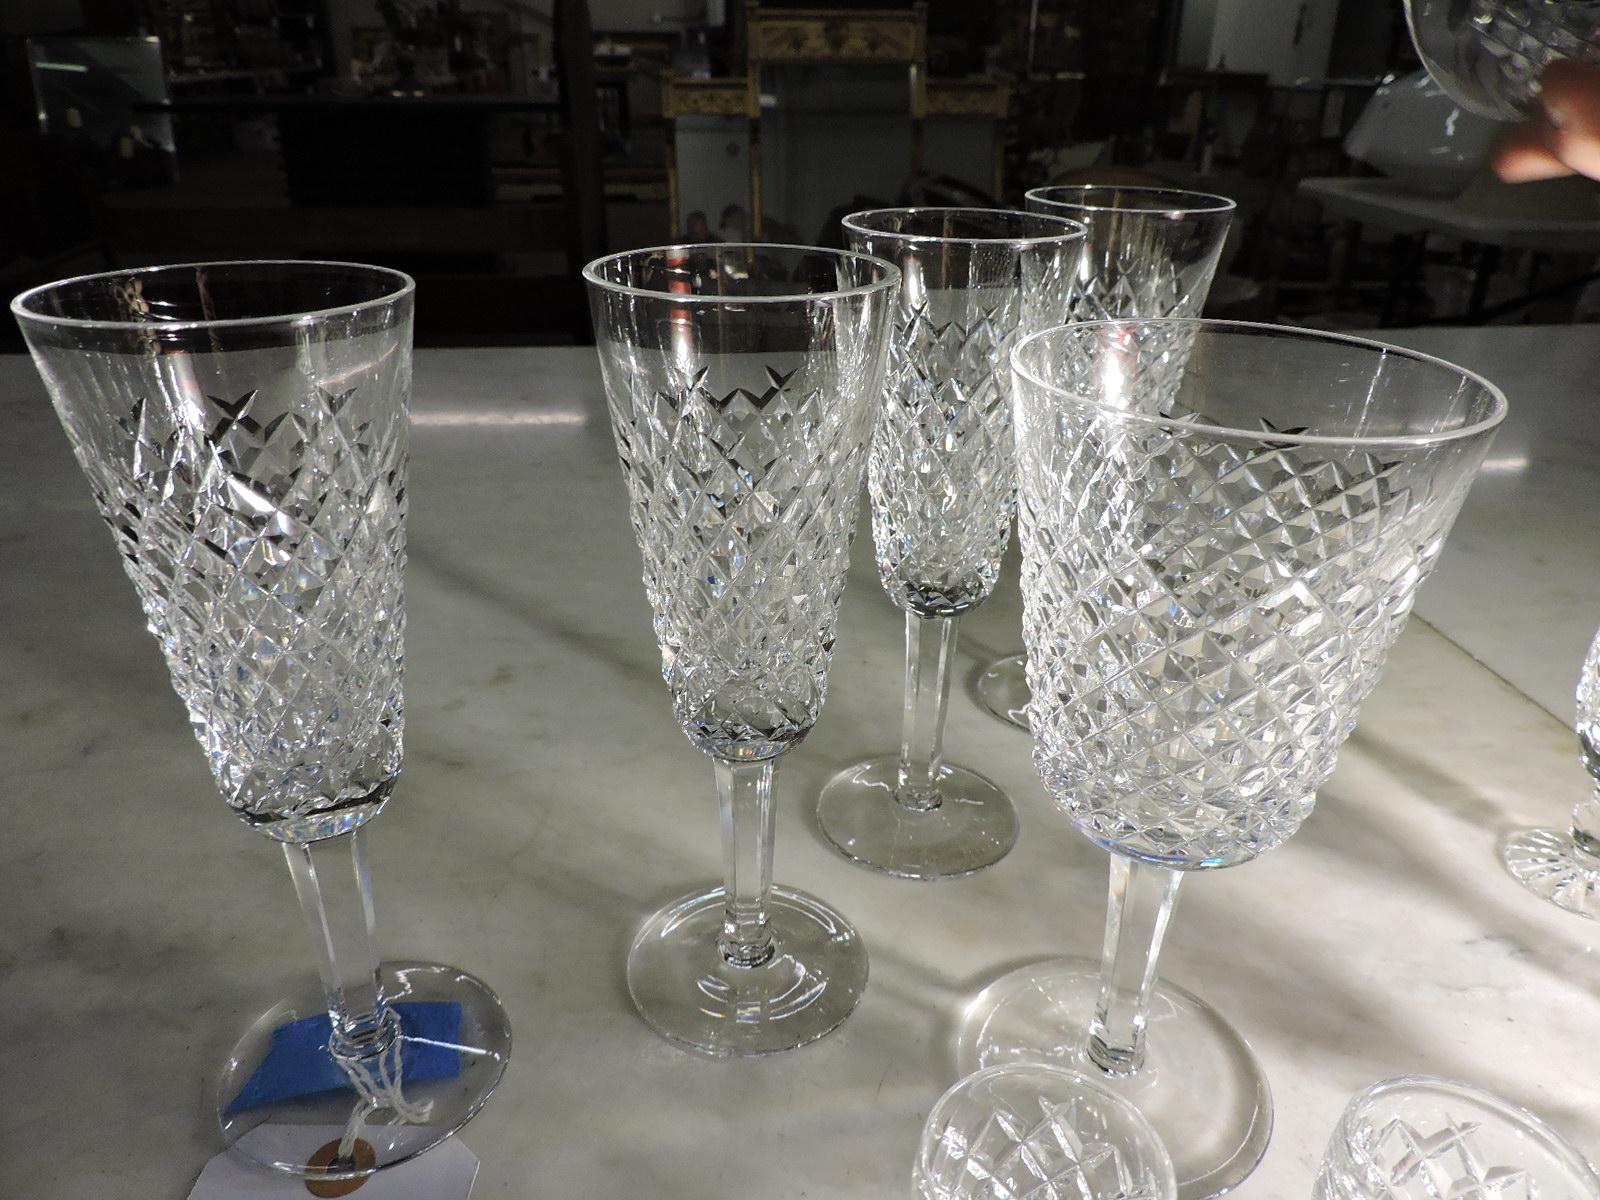 WATERFORD Crystal Glass Set - 2 Wine Glasses, 4 Champagne Flutes, 6 Small Cordial Glasses